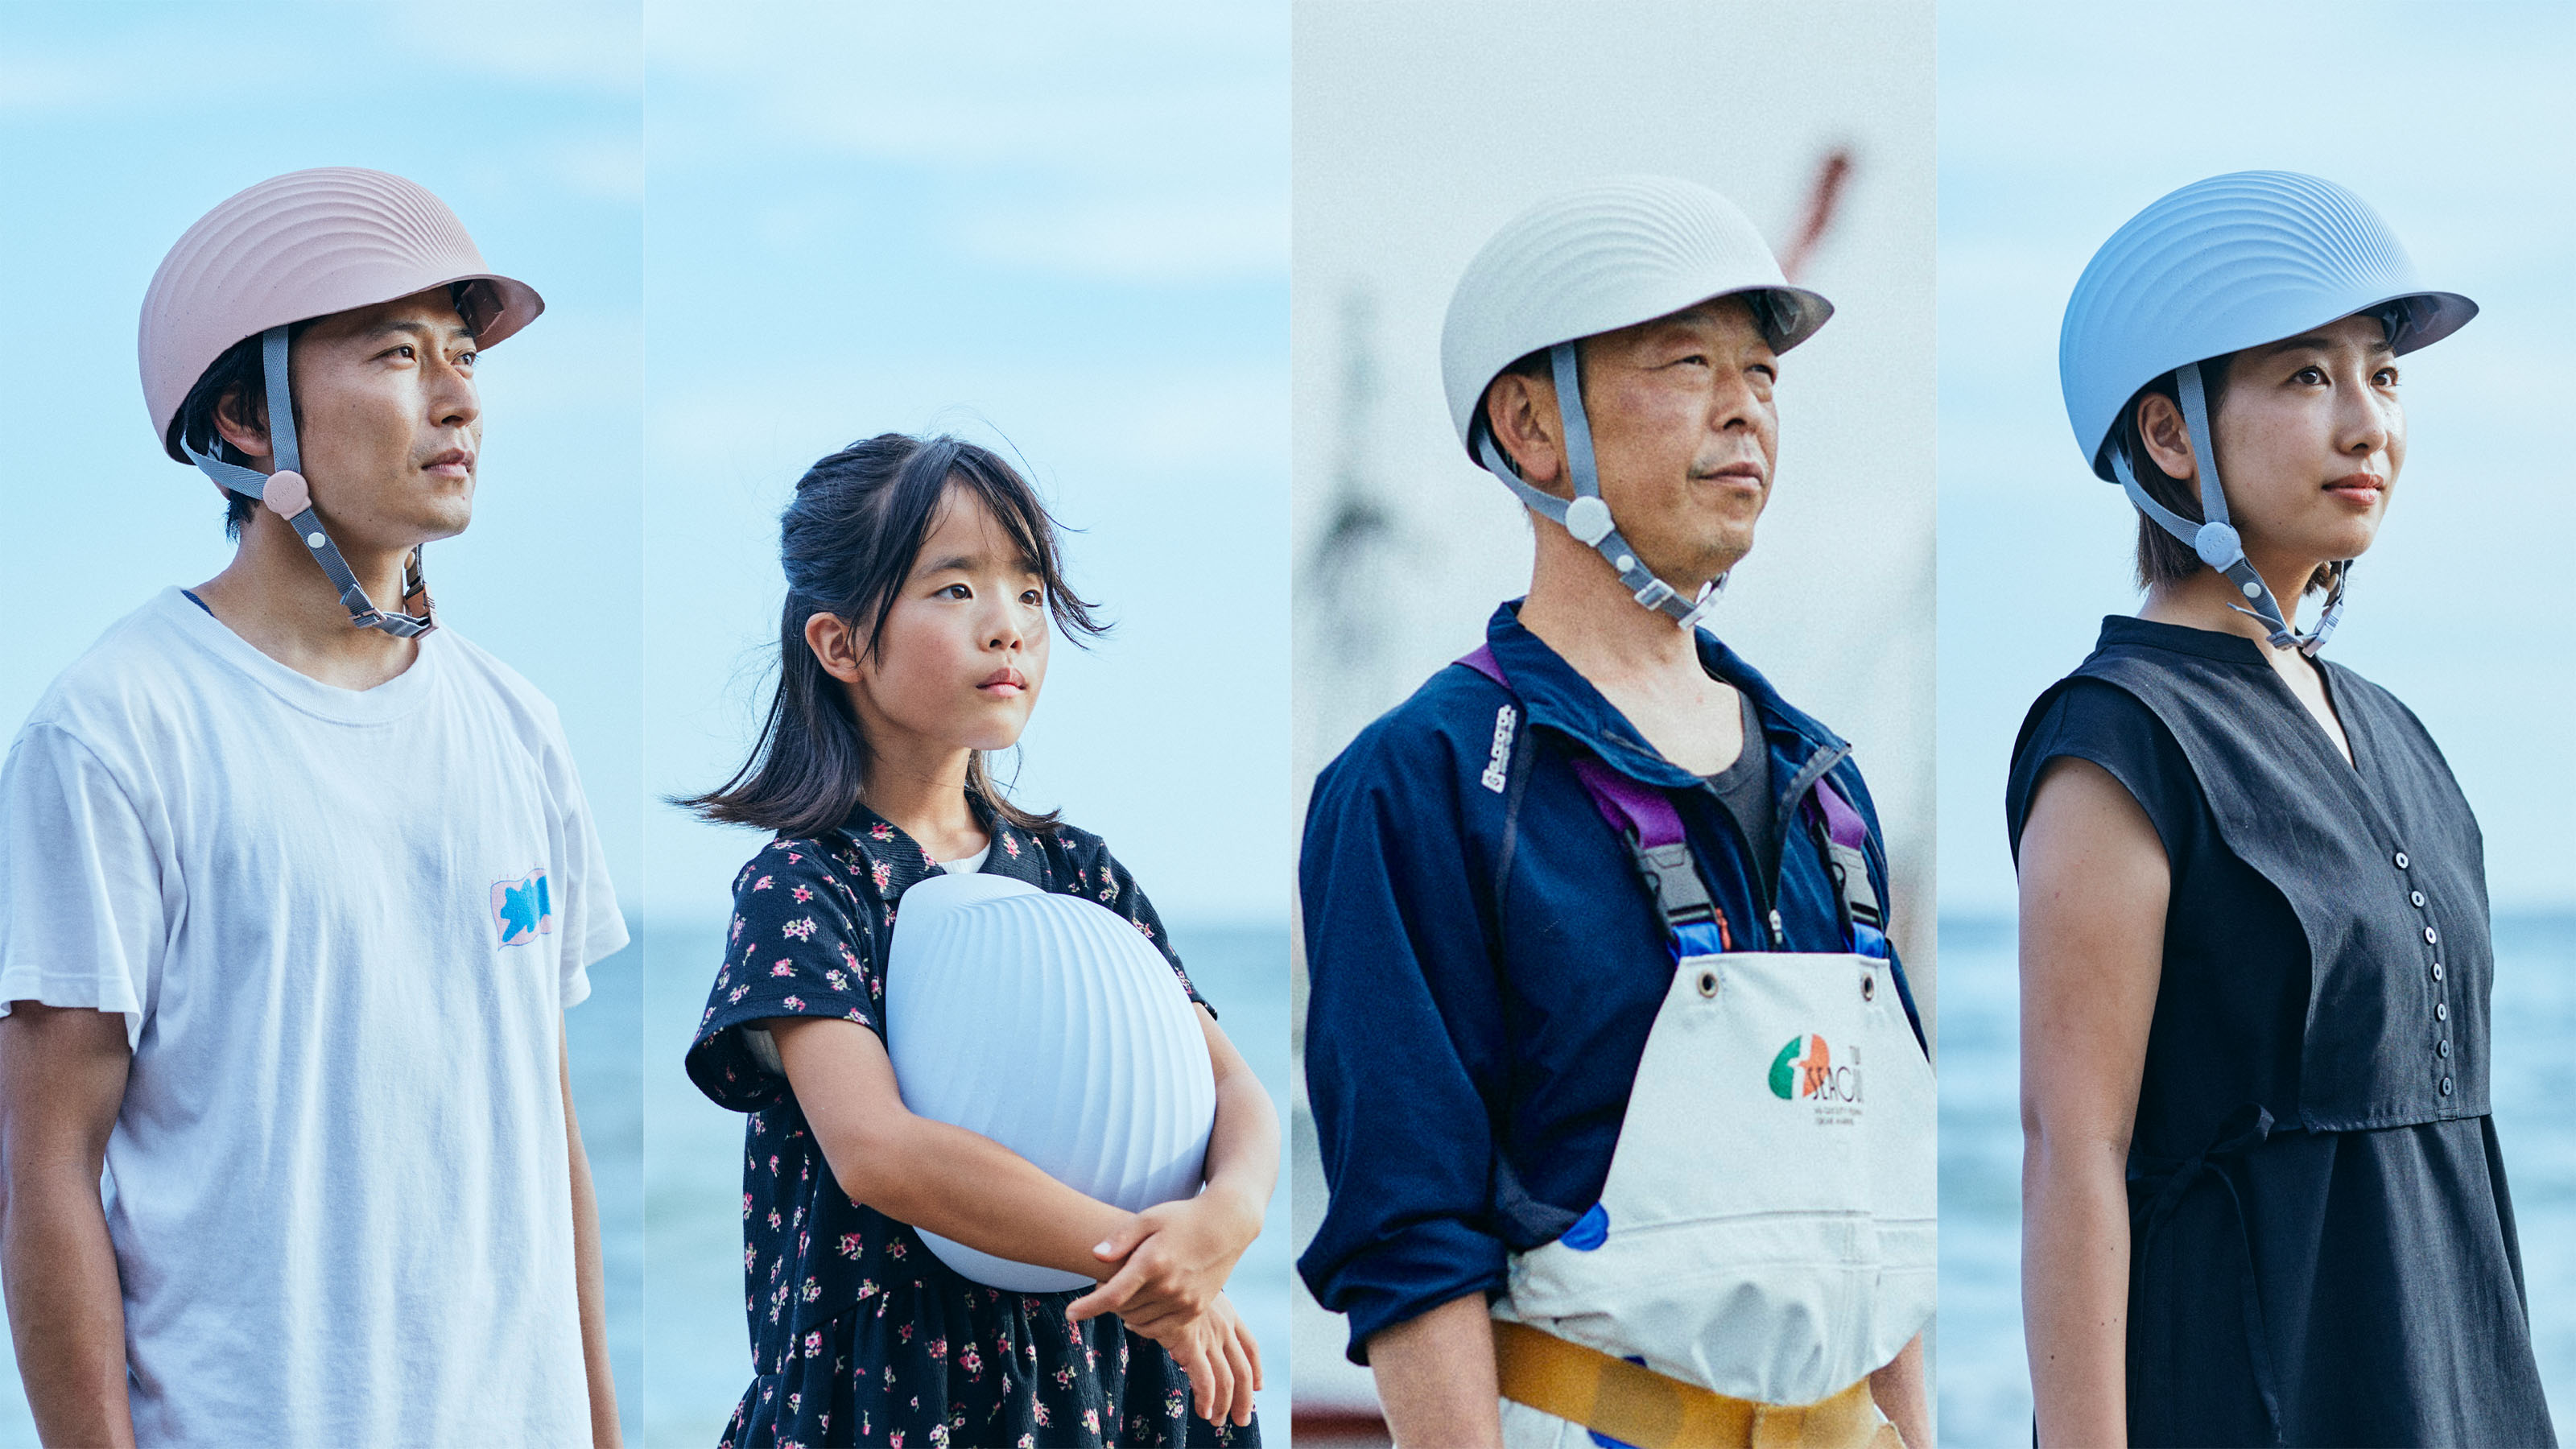 four people wearing the shellmet helmet. Two adults, a young girl, and a fisherman.